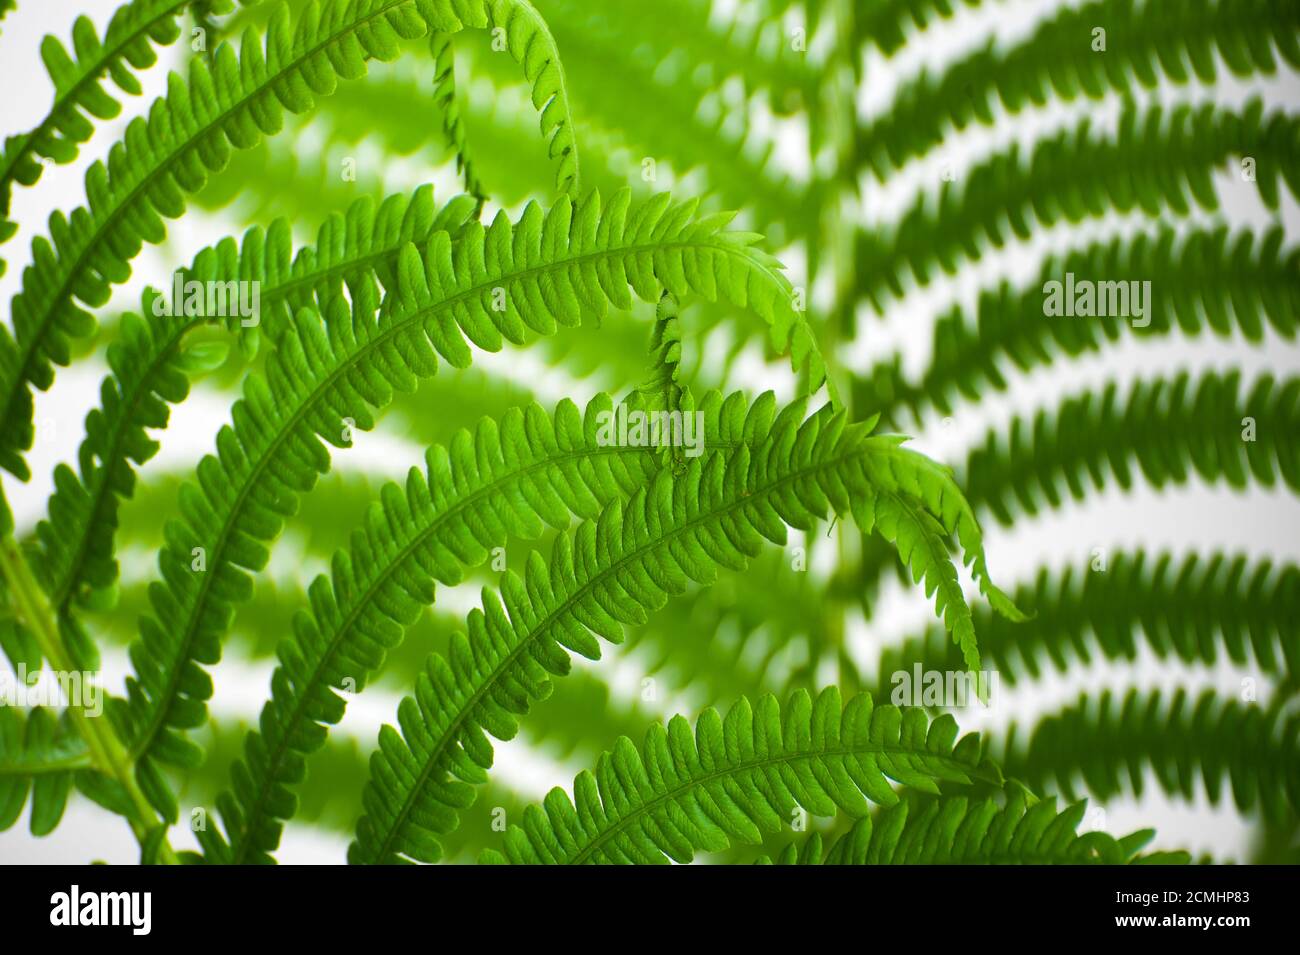 The leaves of wild fern close-ups as a background. Stock Photo